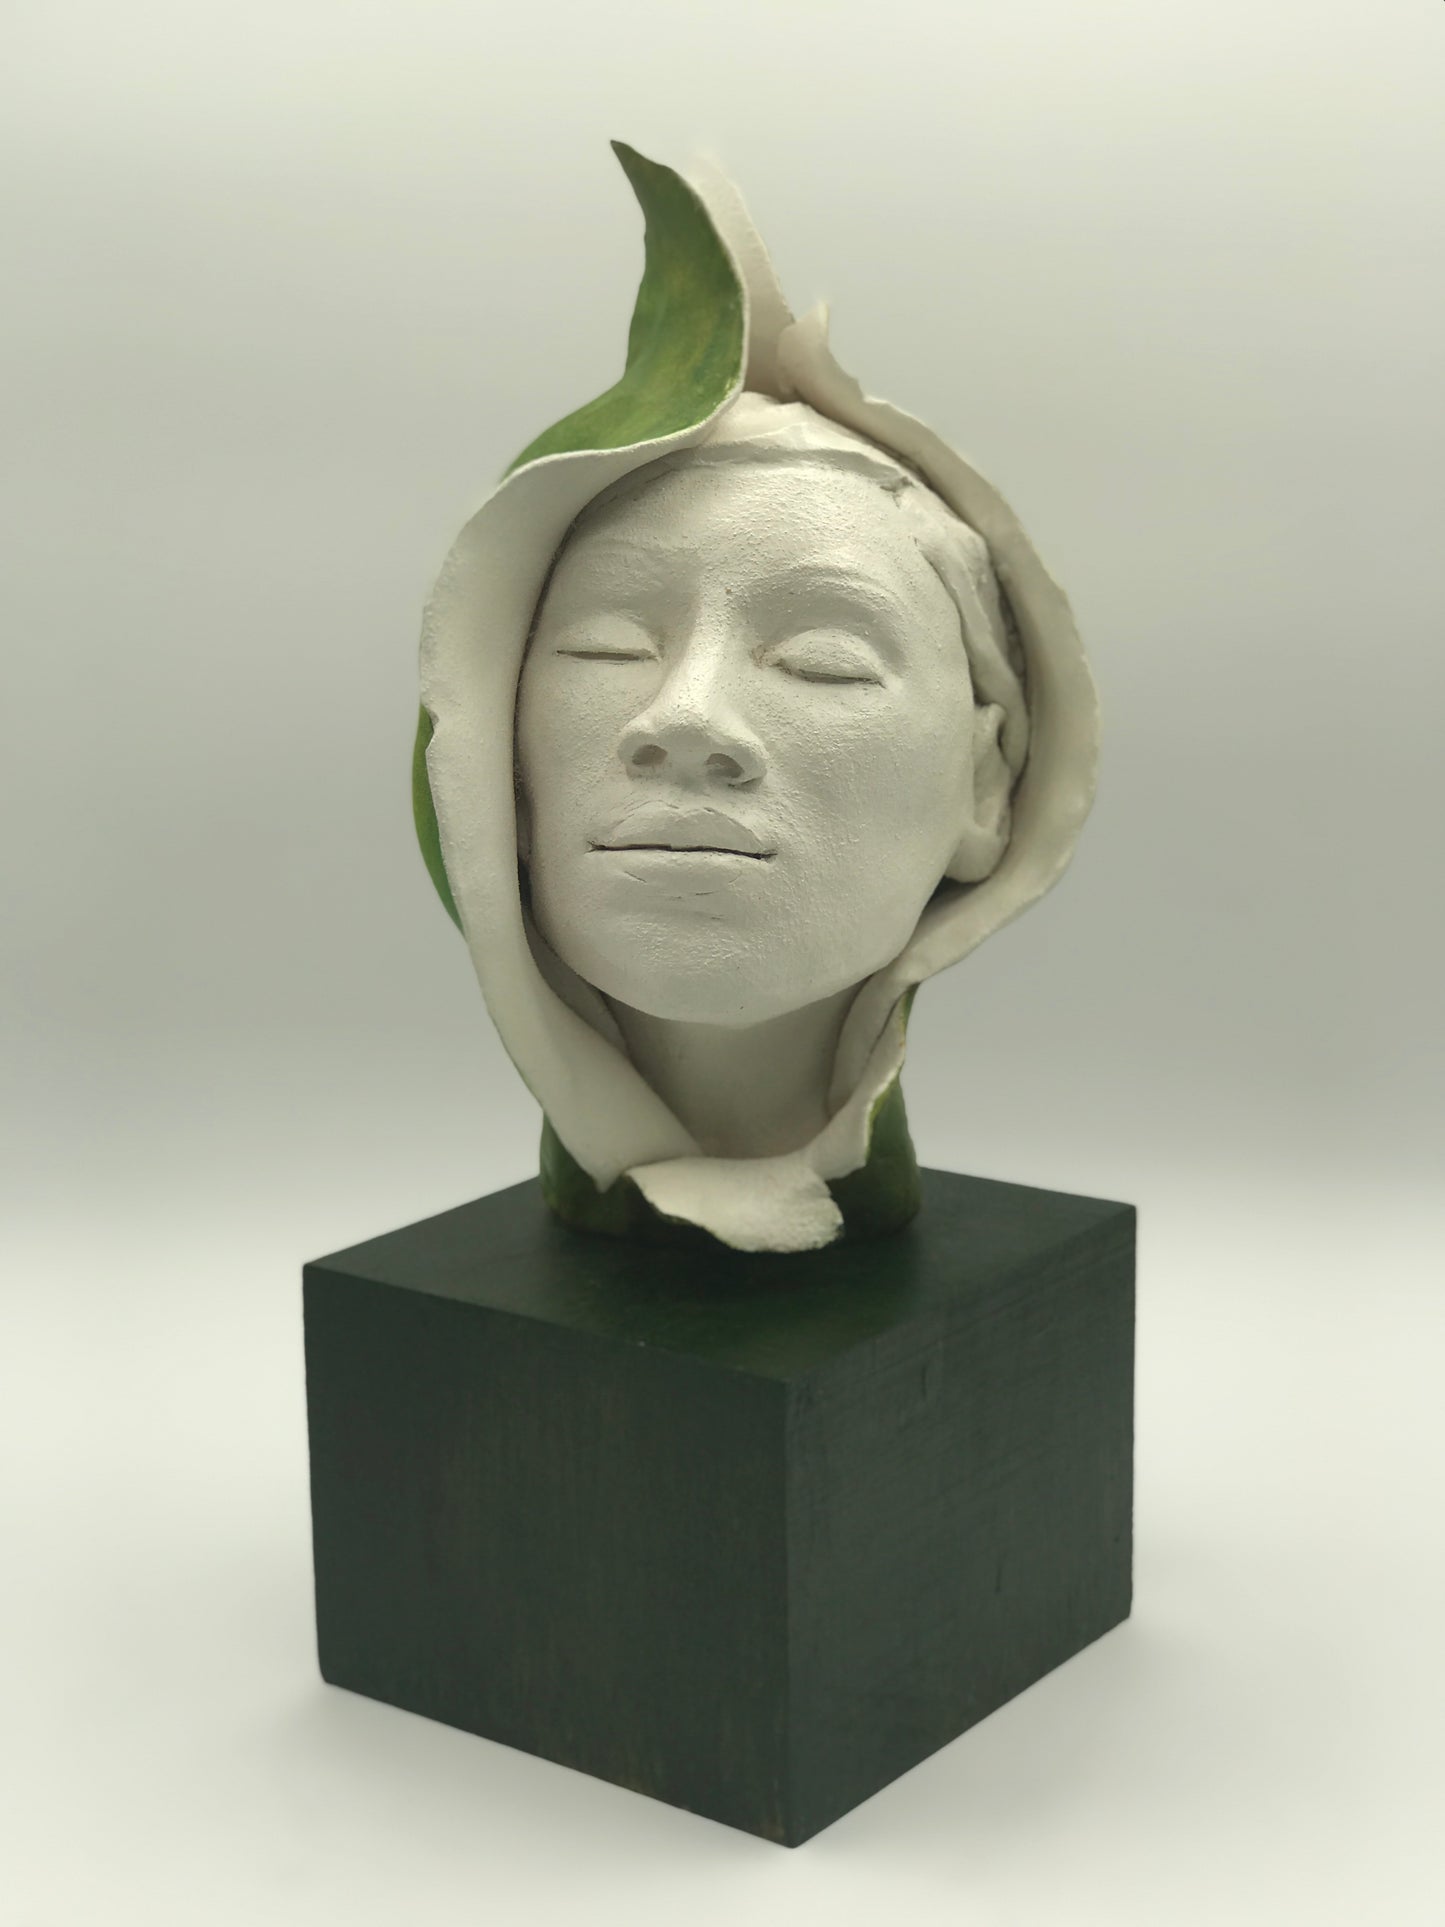 Blossoming: Contemporary Clay Sculpture, Woman's Face